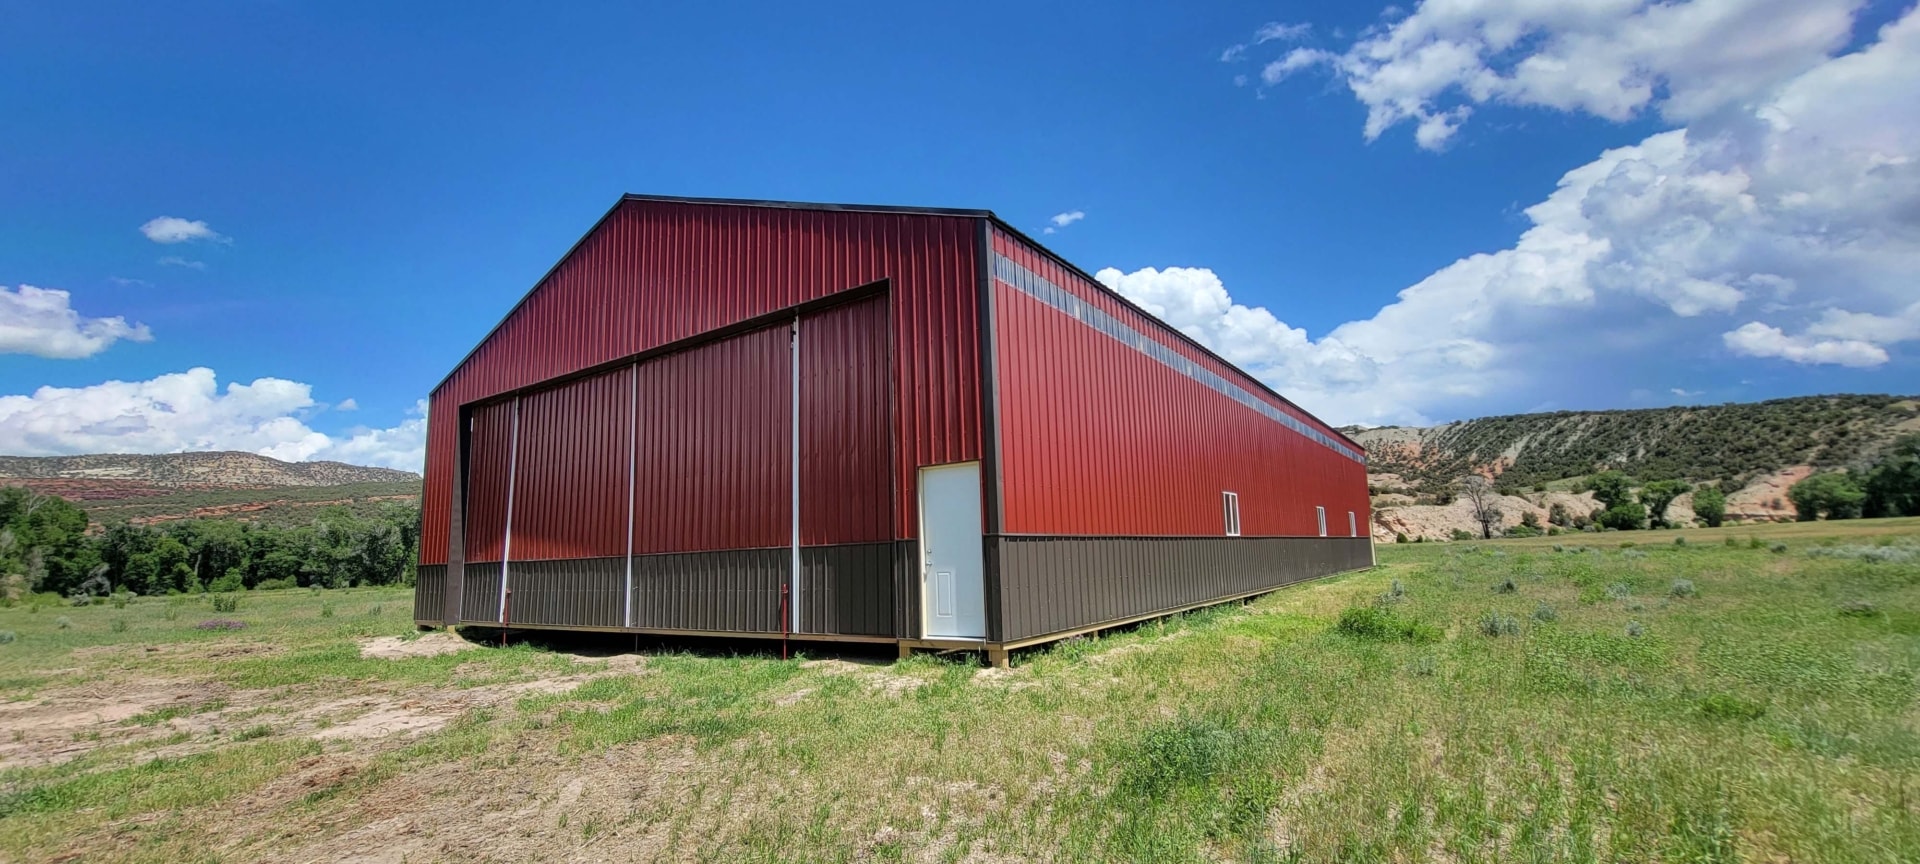 private hangar for sale wyoming thieves den ranch